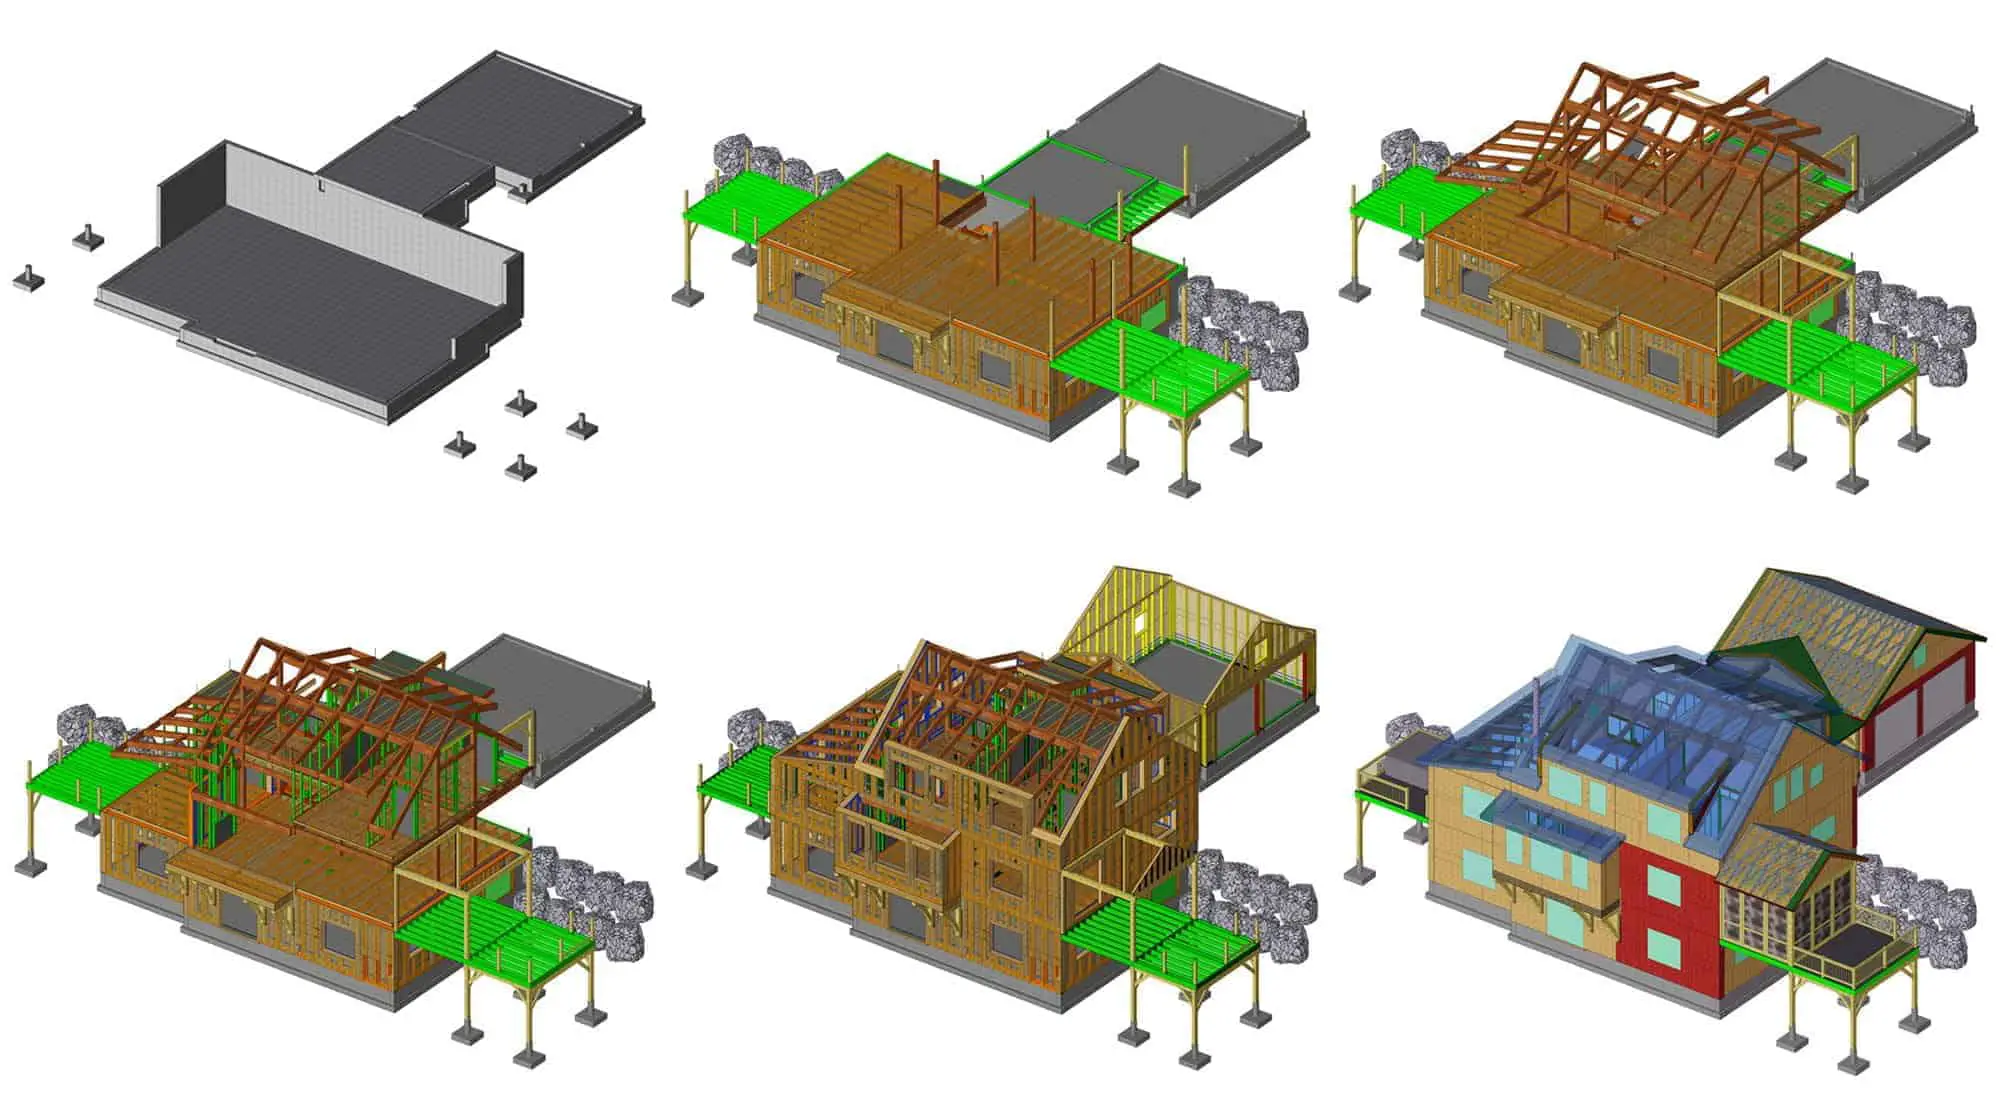 Unity Homes computer-aided prefab home design process.